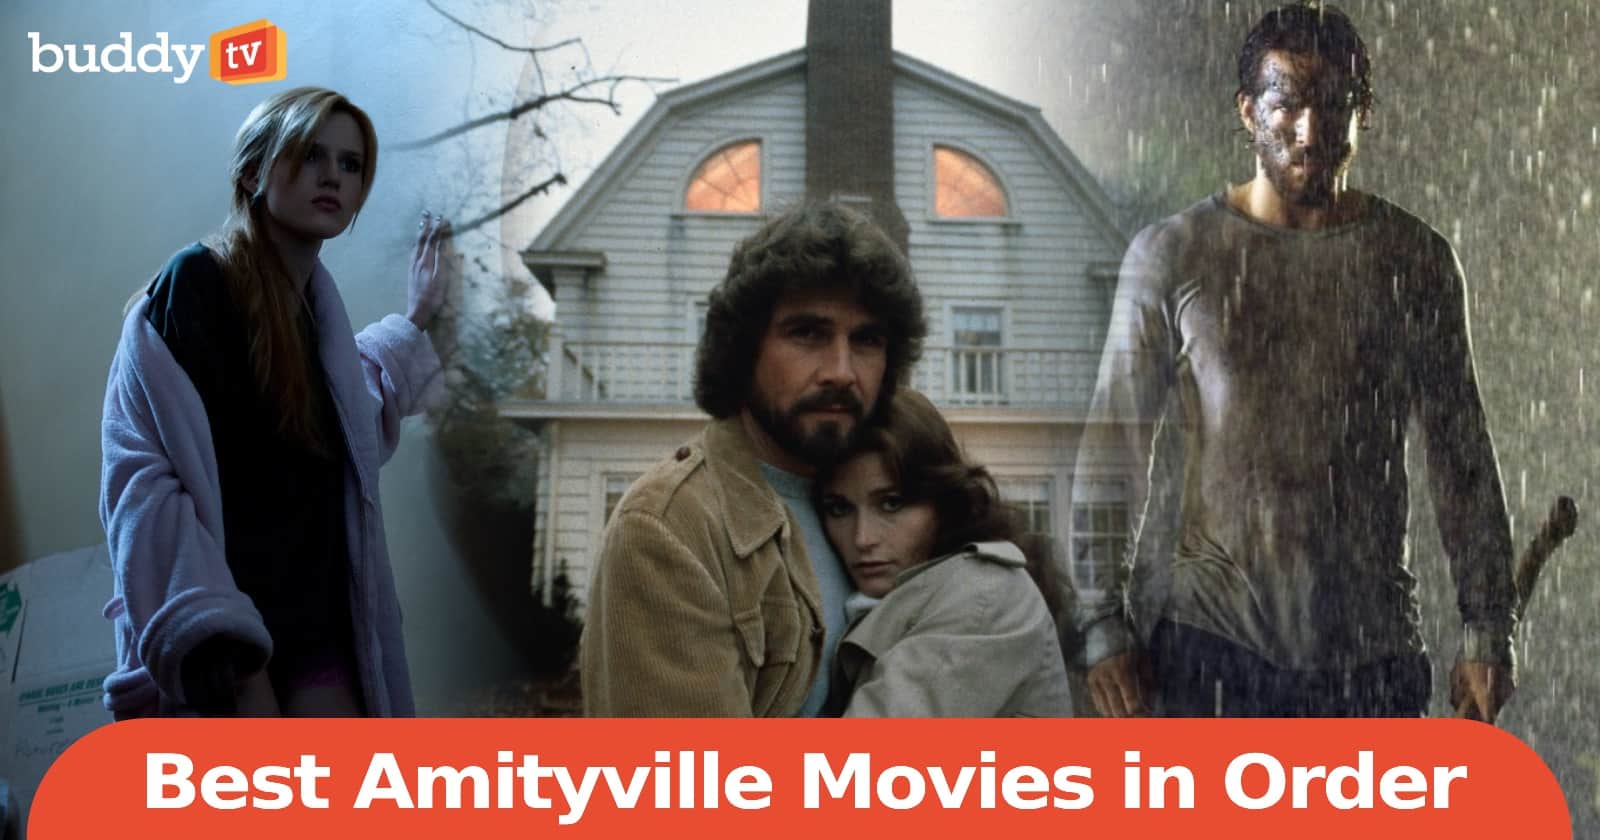 10 Best Amityville Movies in Order, Ranked by Viewers